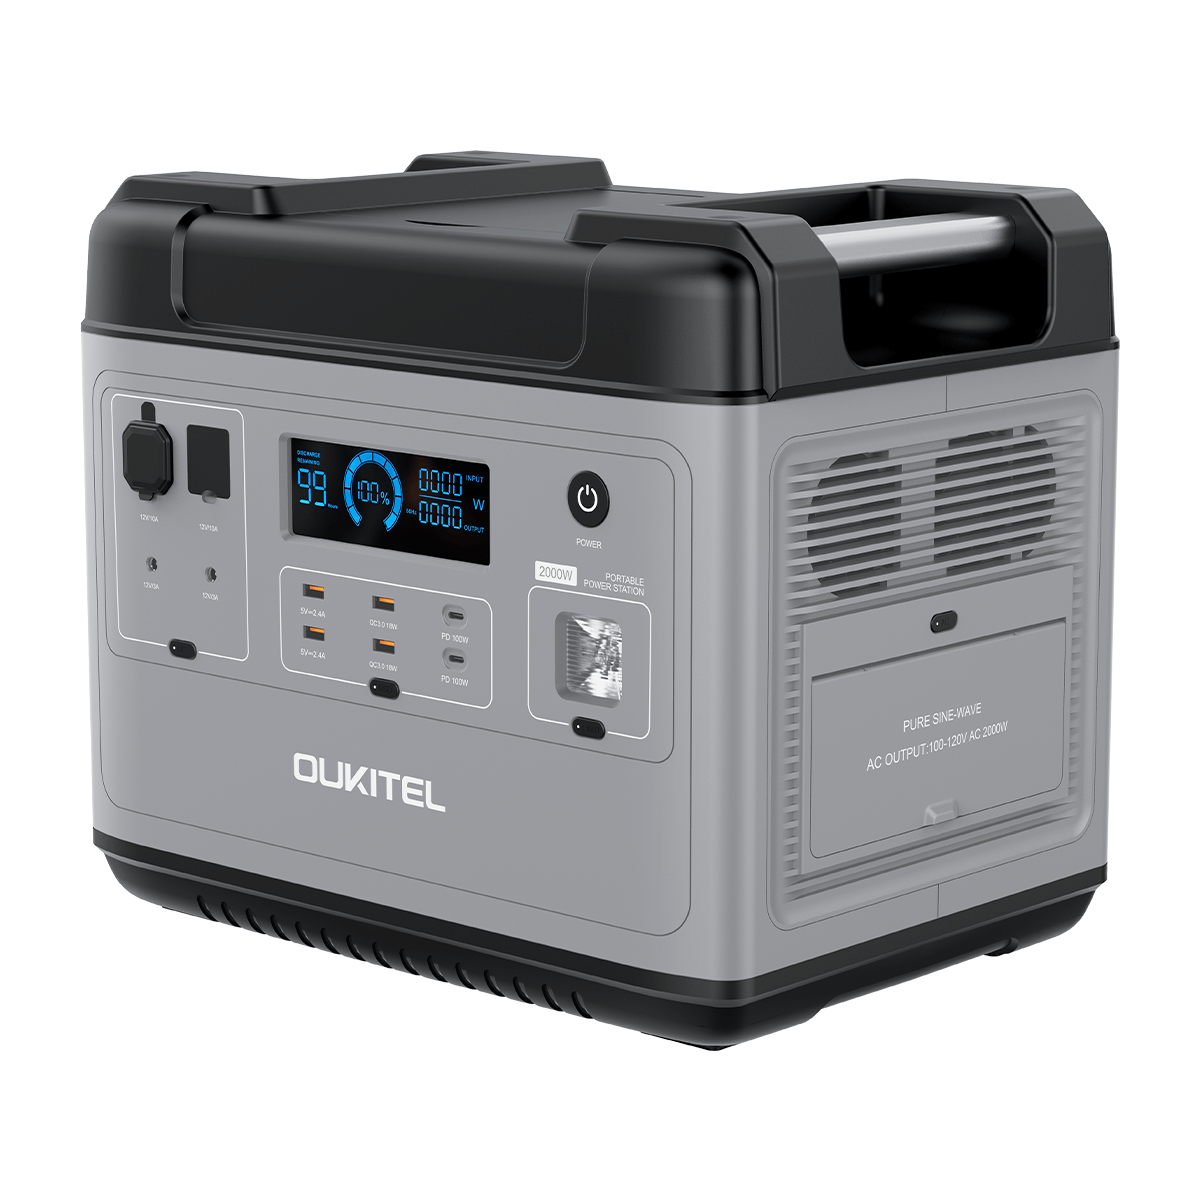 [US Direct] OUKITEL P2001 2000W/2000Wh LiFePo4 Battery Portable Power Station Storage Solution Solar Powered Outdoor Generator Emergency Power Supply Cpap Battery Backup For Outdoor Camping